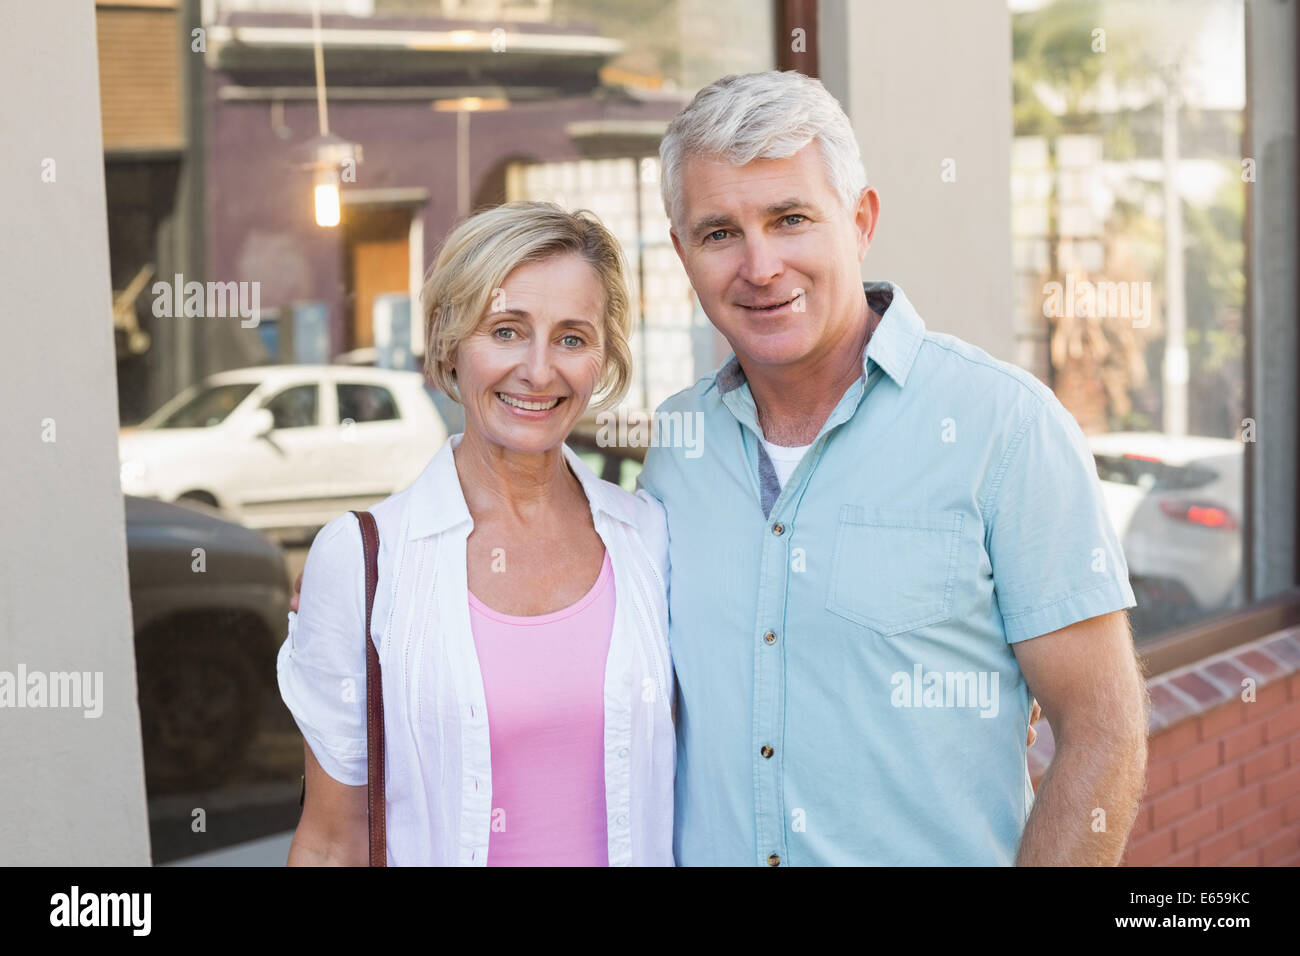 Happy mature couple smiling at camera in the city Stock Photo